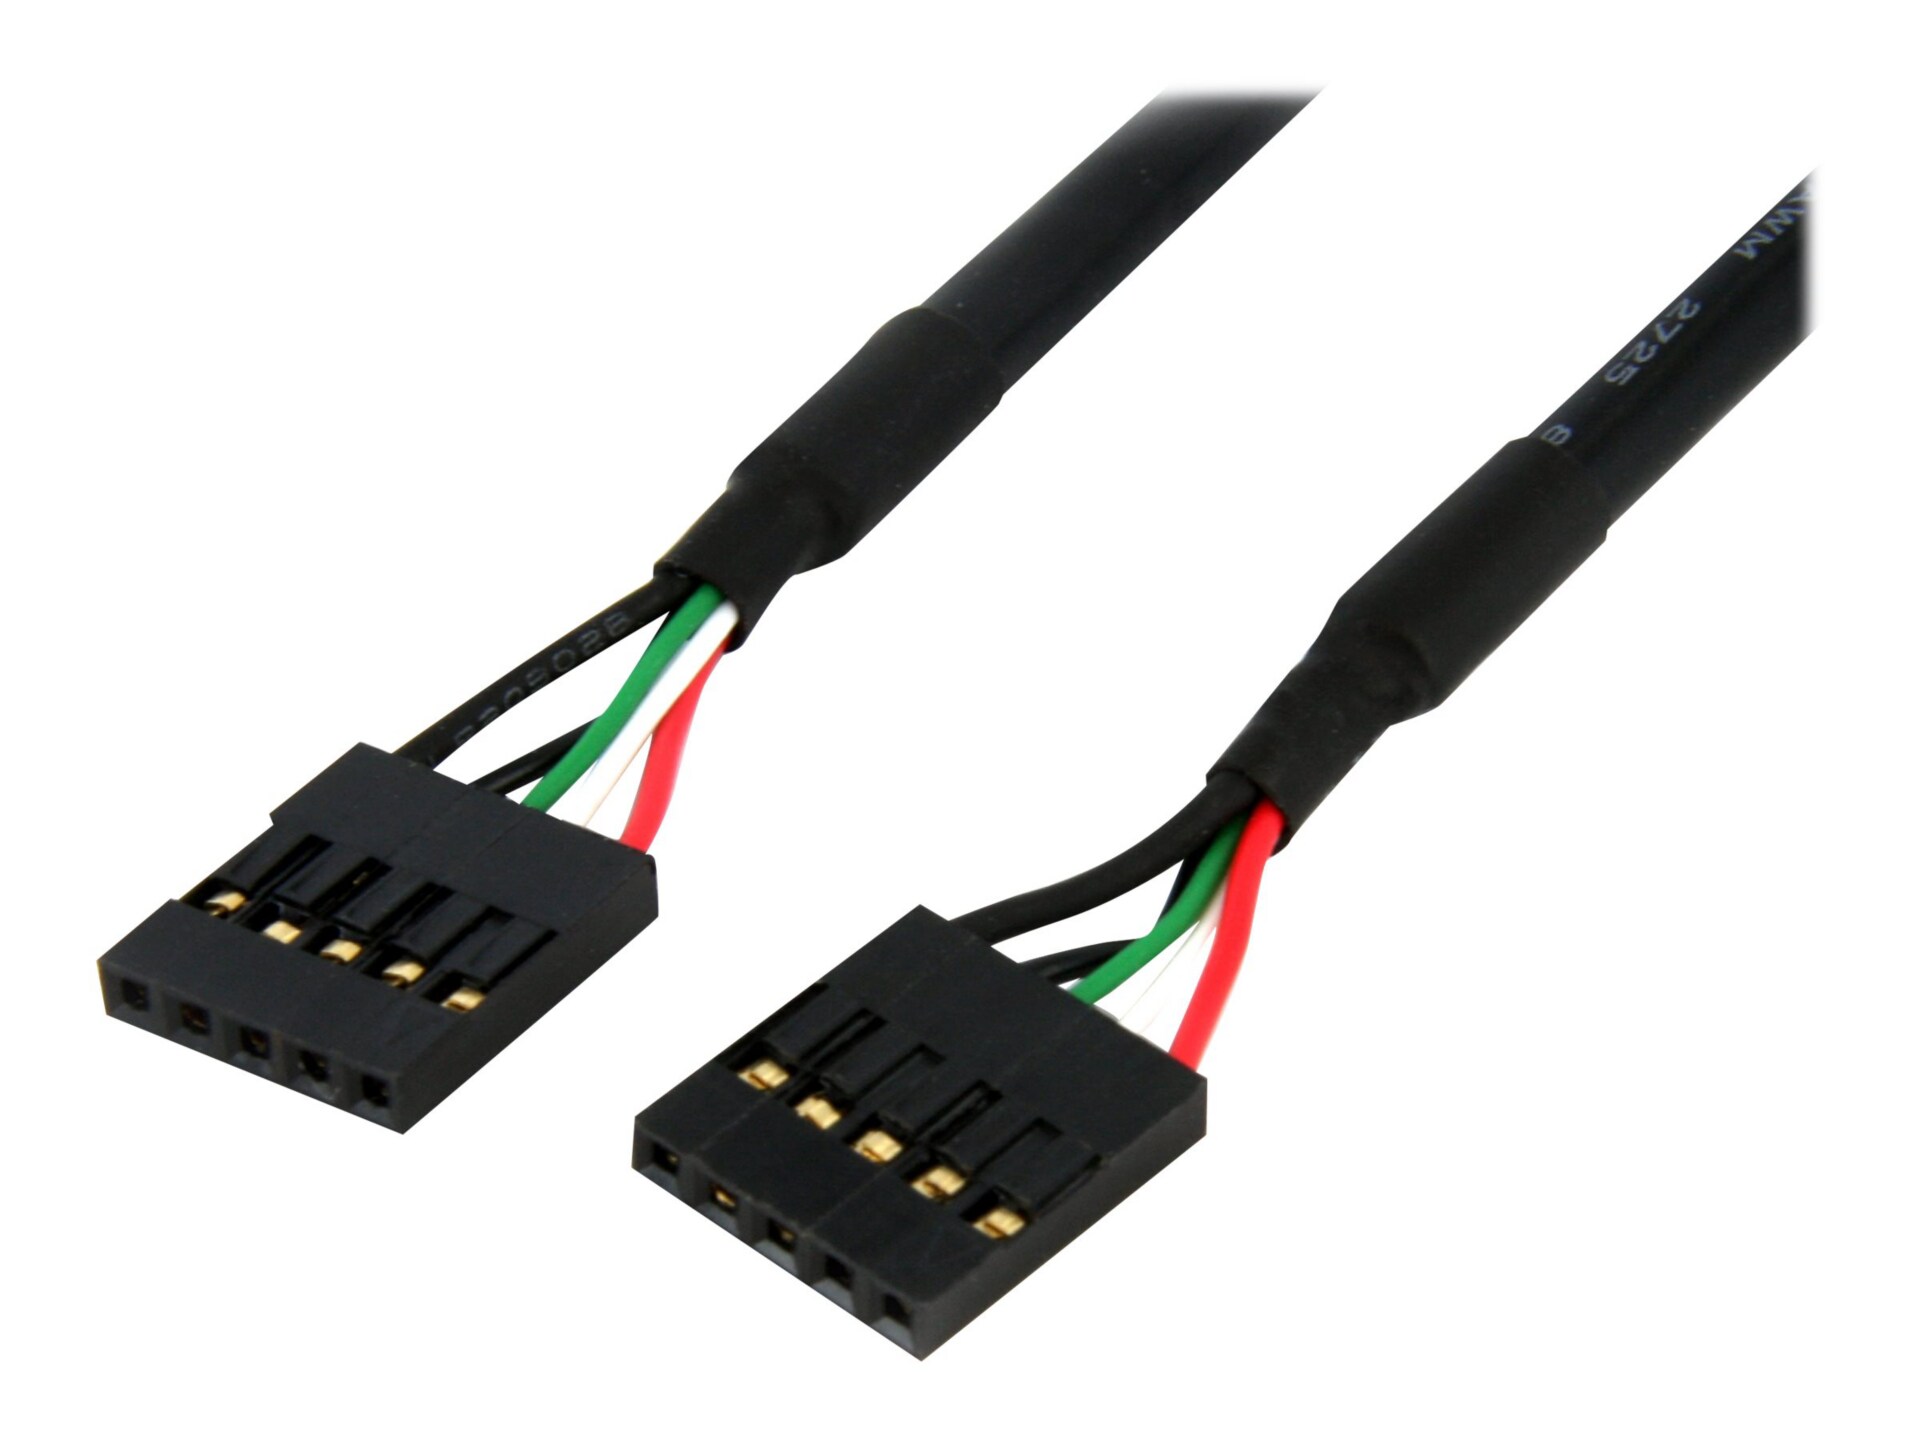 StarTech.com 24in Internal 5 pin USB IDC Motherboard Header Cable F/F - USB cable - 5 pin IDC (F) to 5 pin IDC (F) - USB